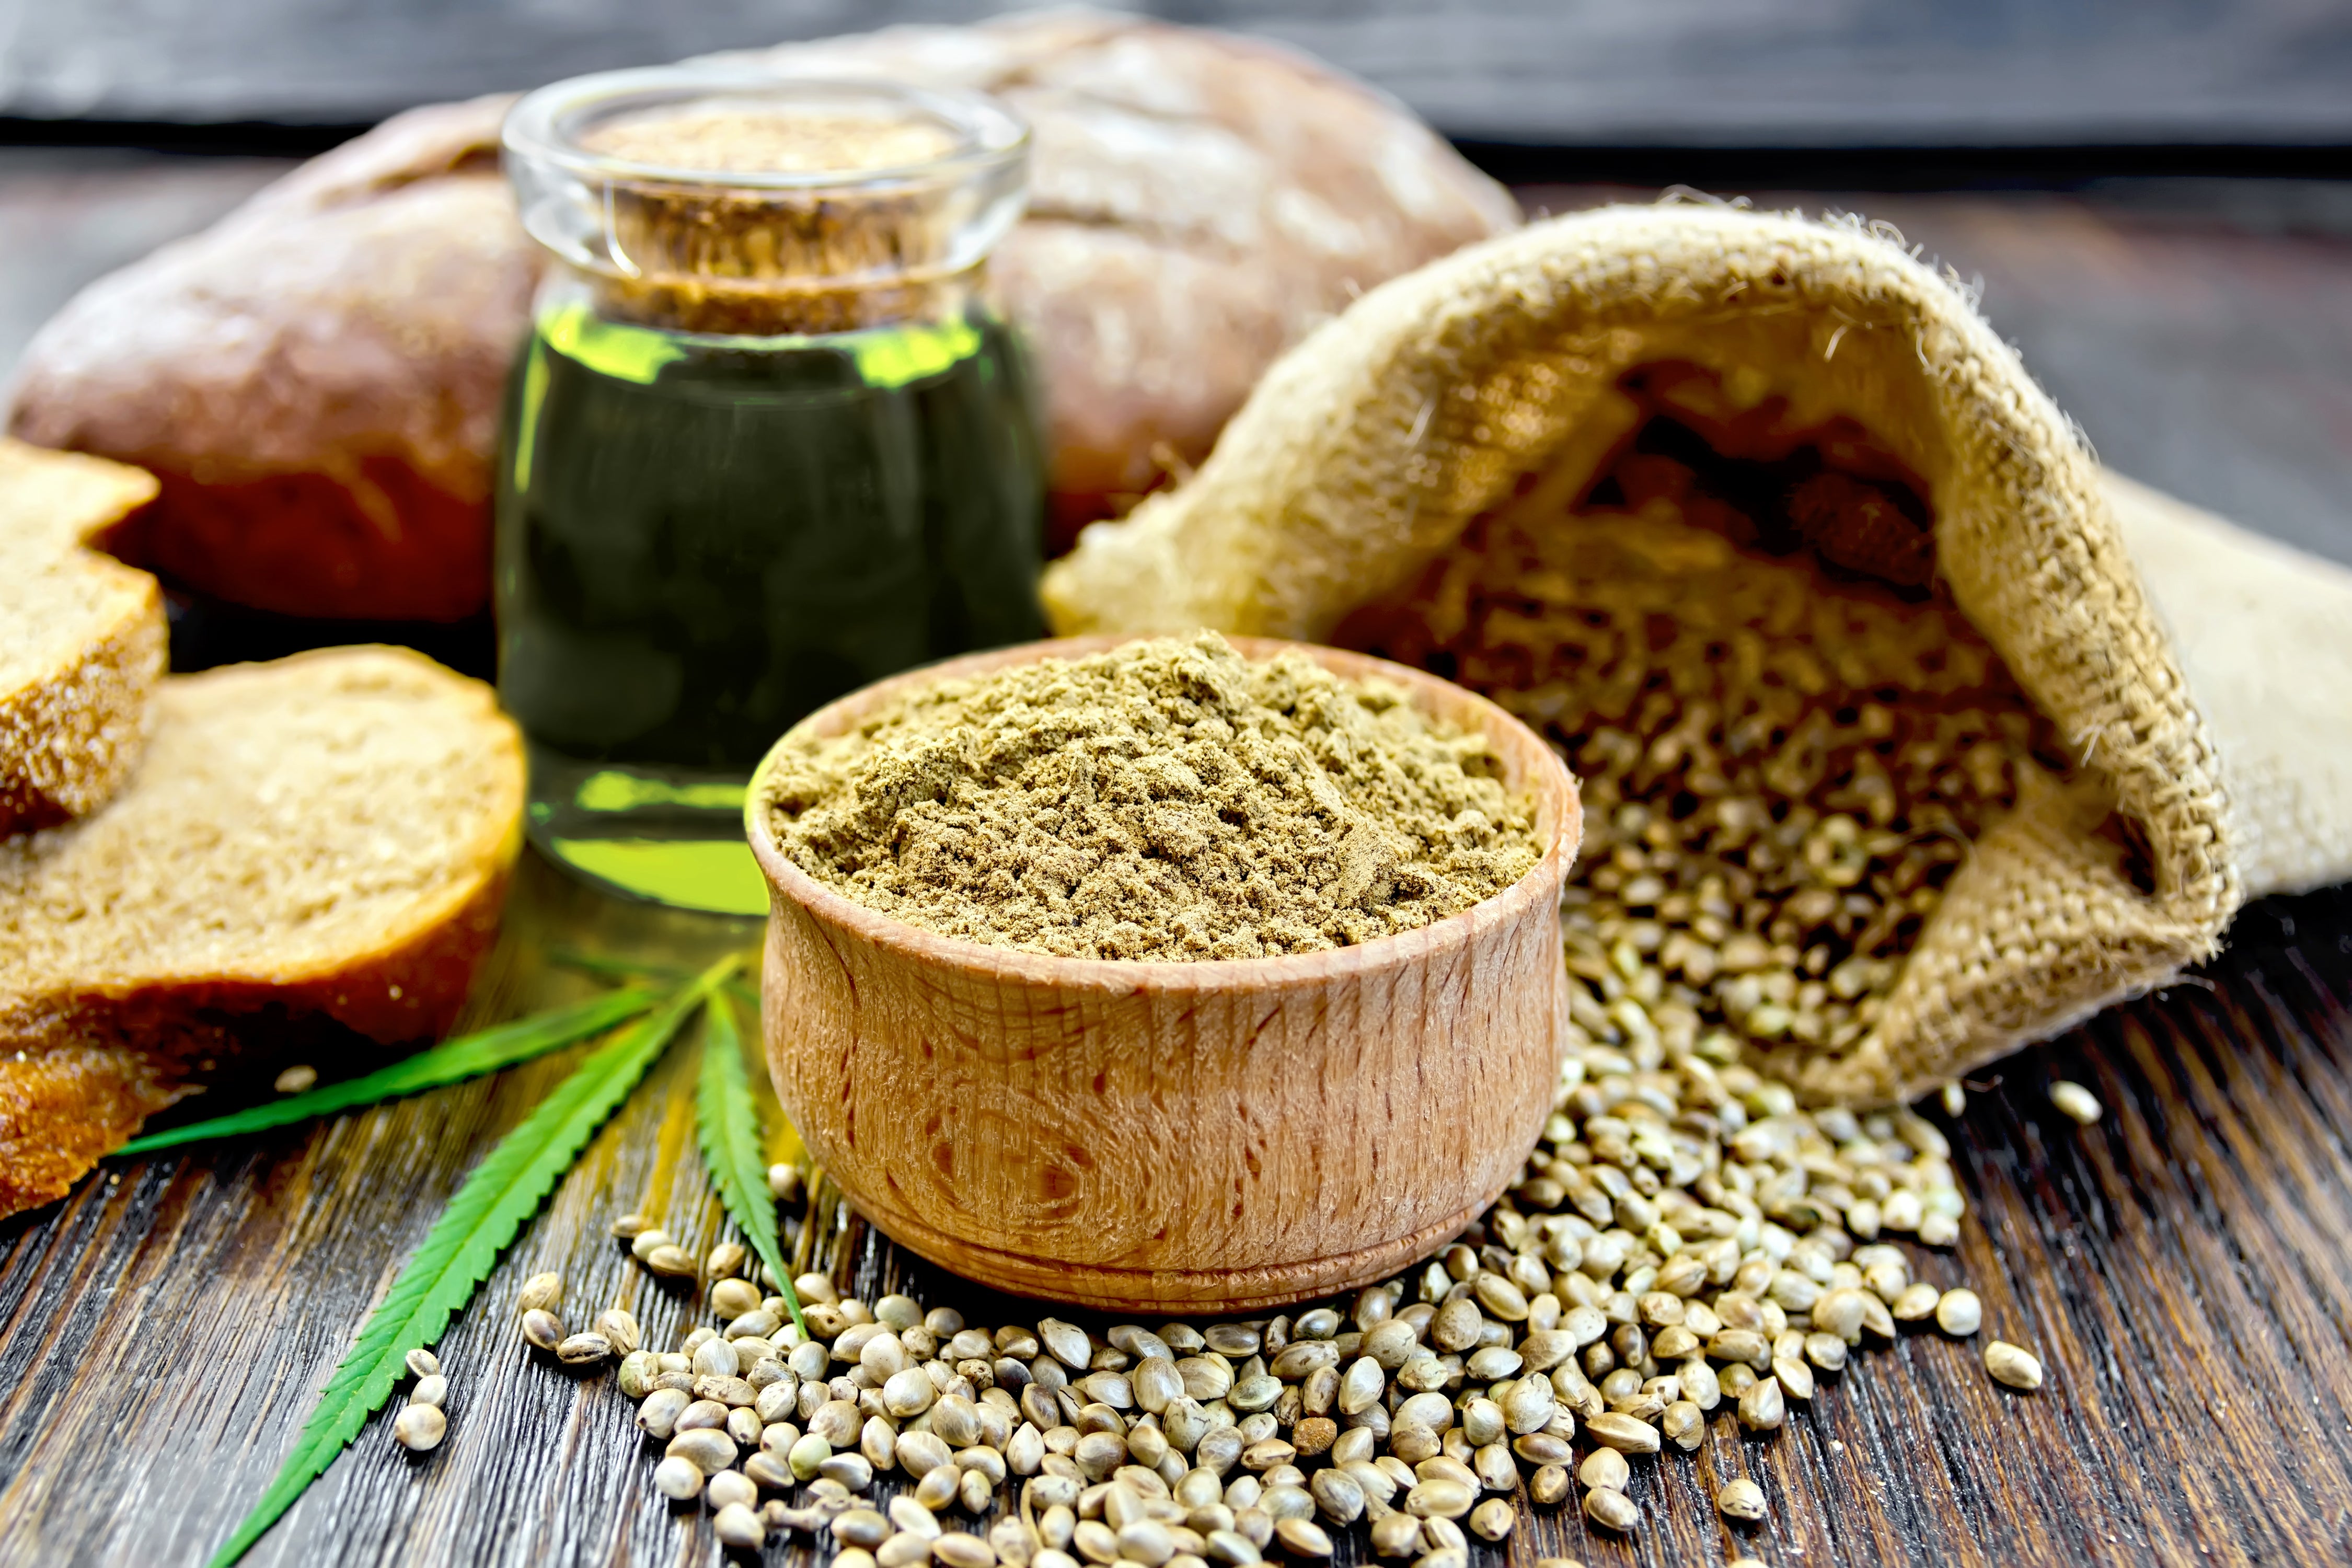 25 Amazing Uses And Benefits Of Hemp Seed Oil | Soap.Club